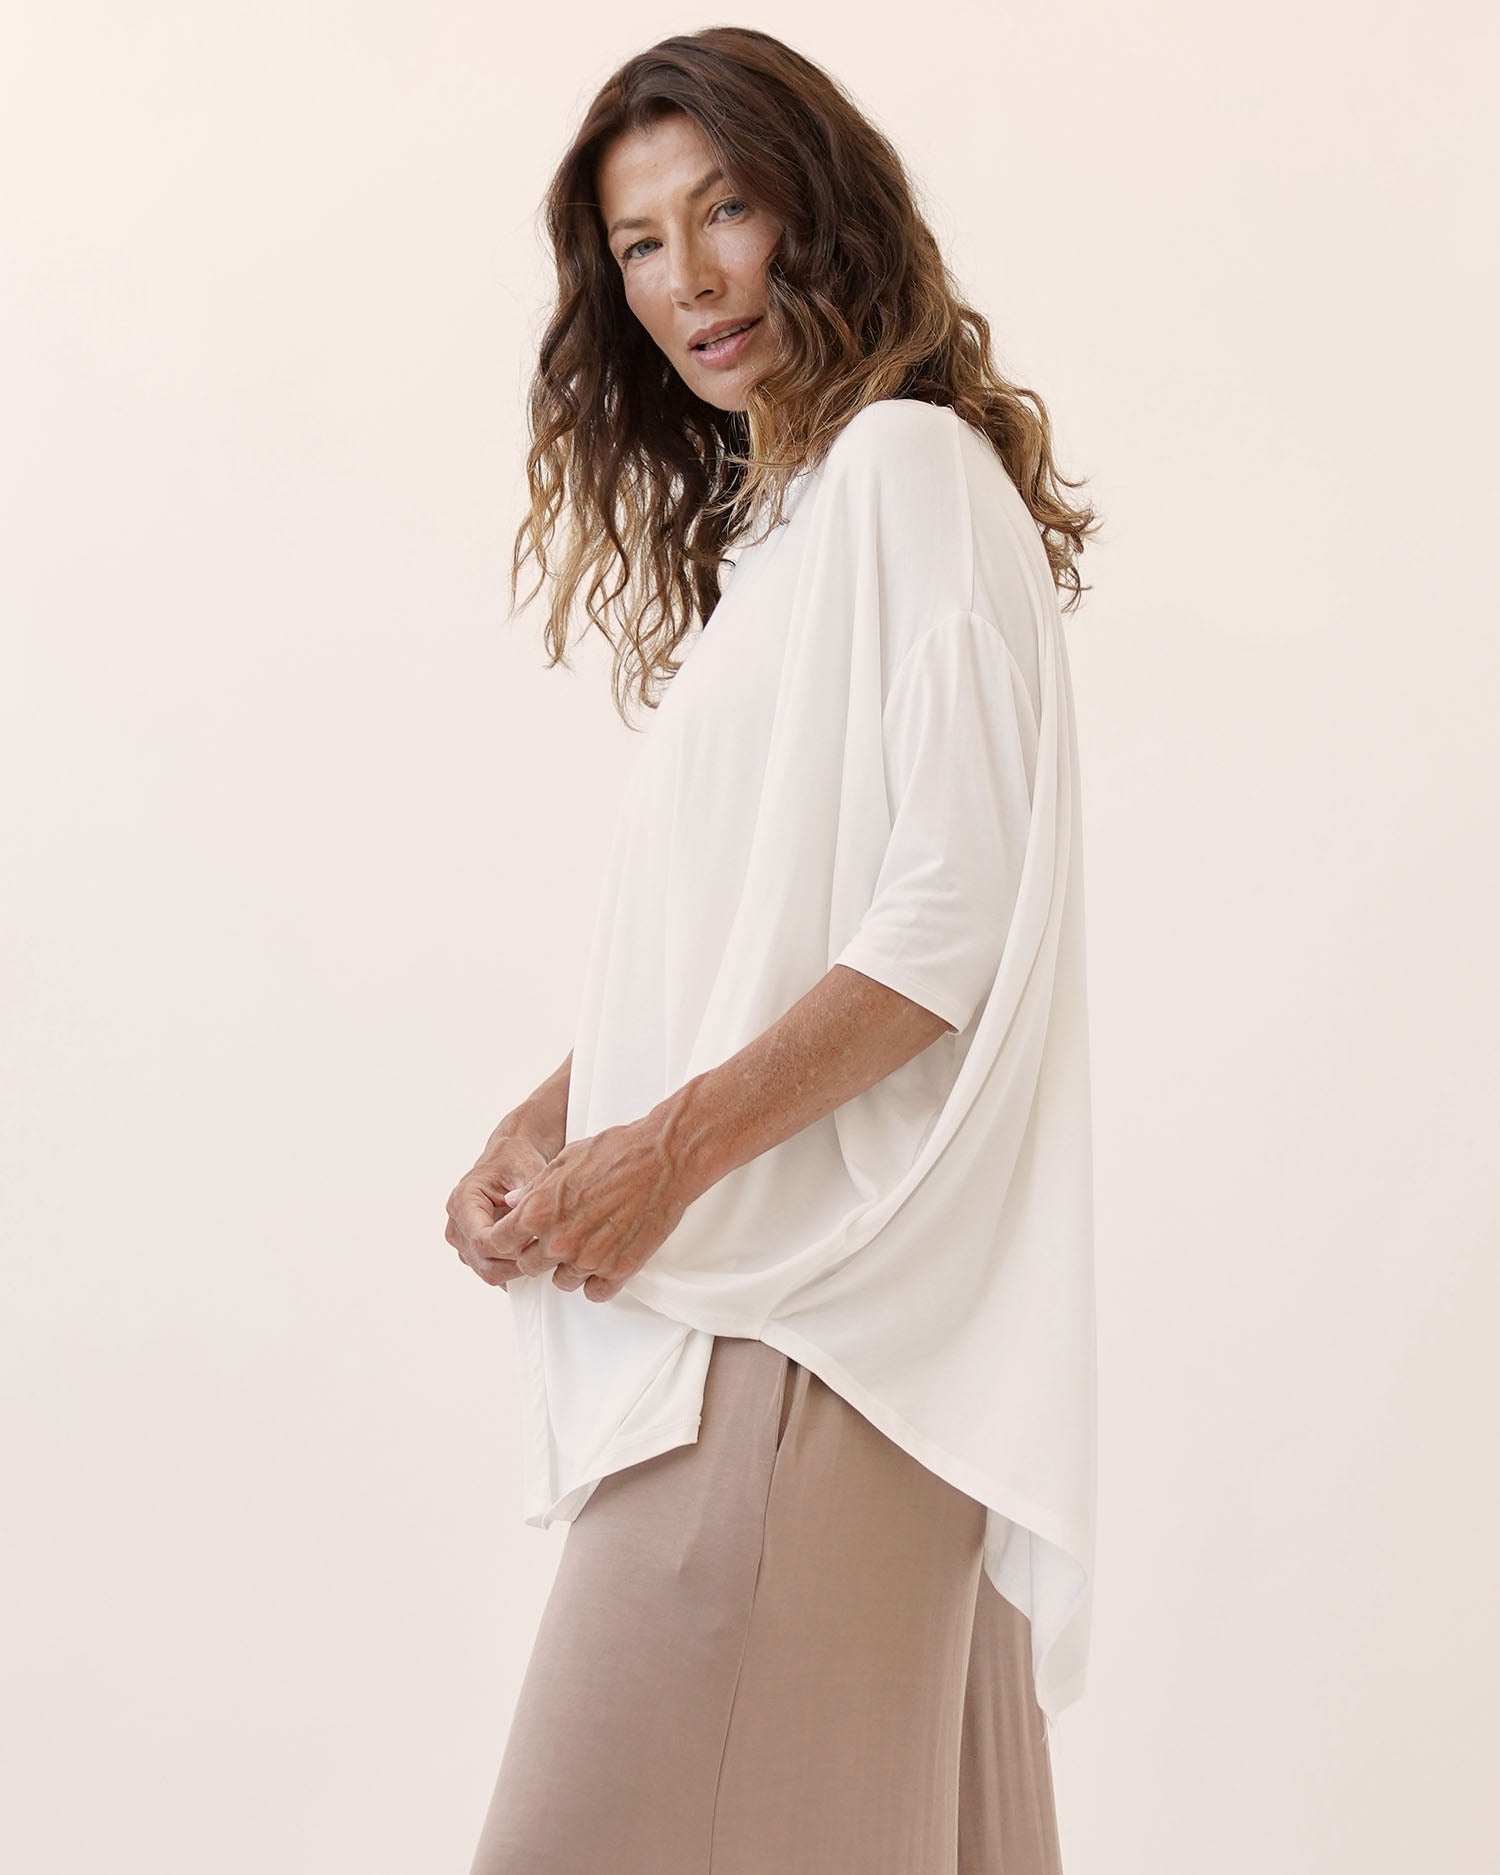 A bamboo poncho tunic top with boat neckline and edgy hemline